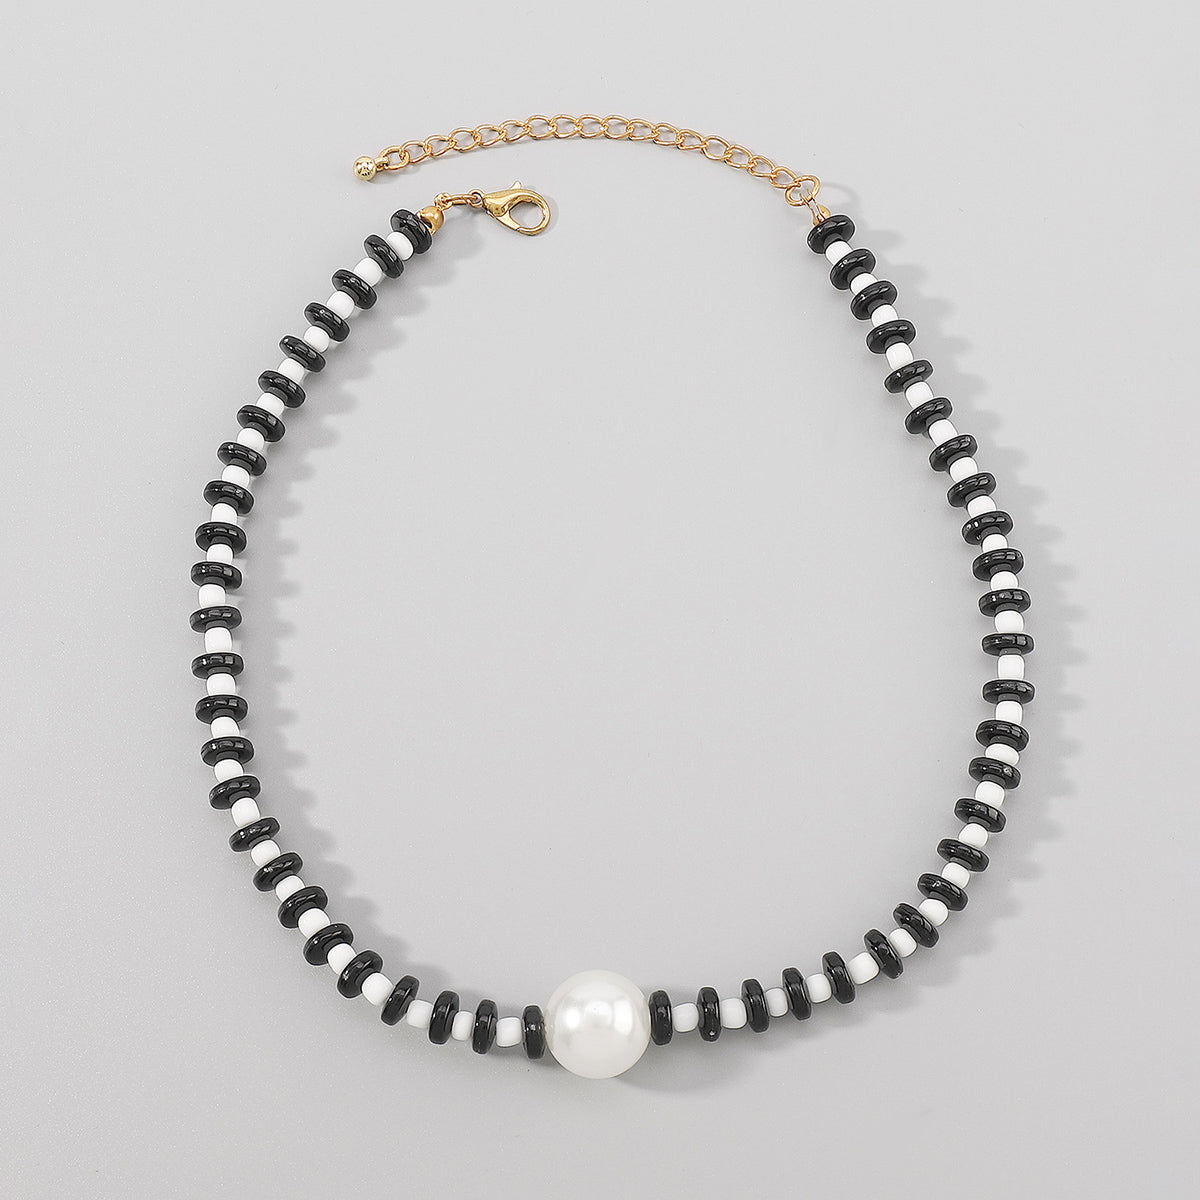 N11479 Colorful Beaded Pearl Pendant Necklace